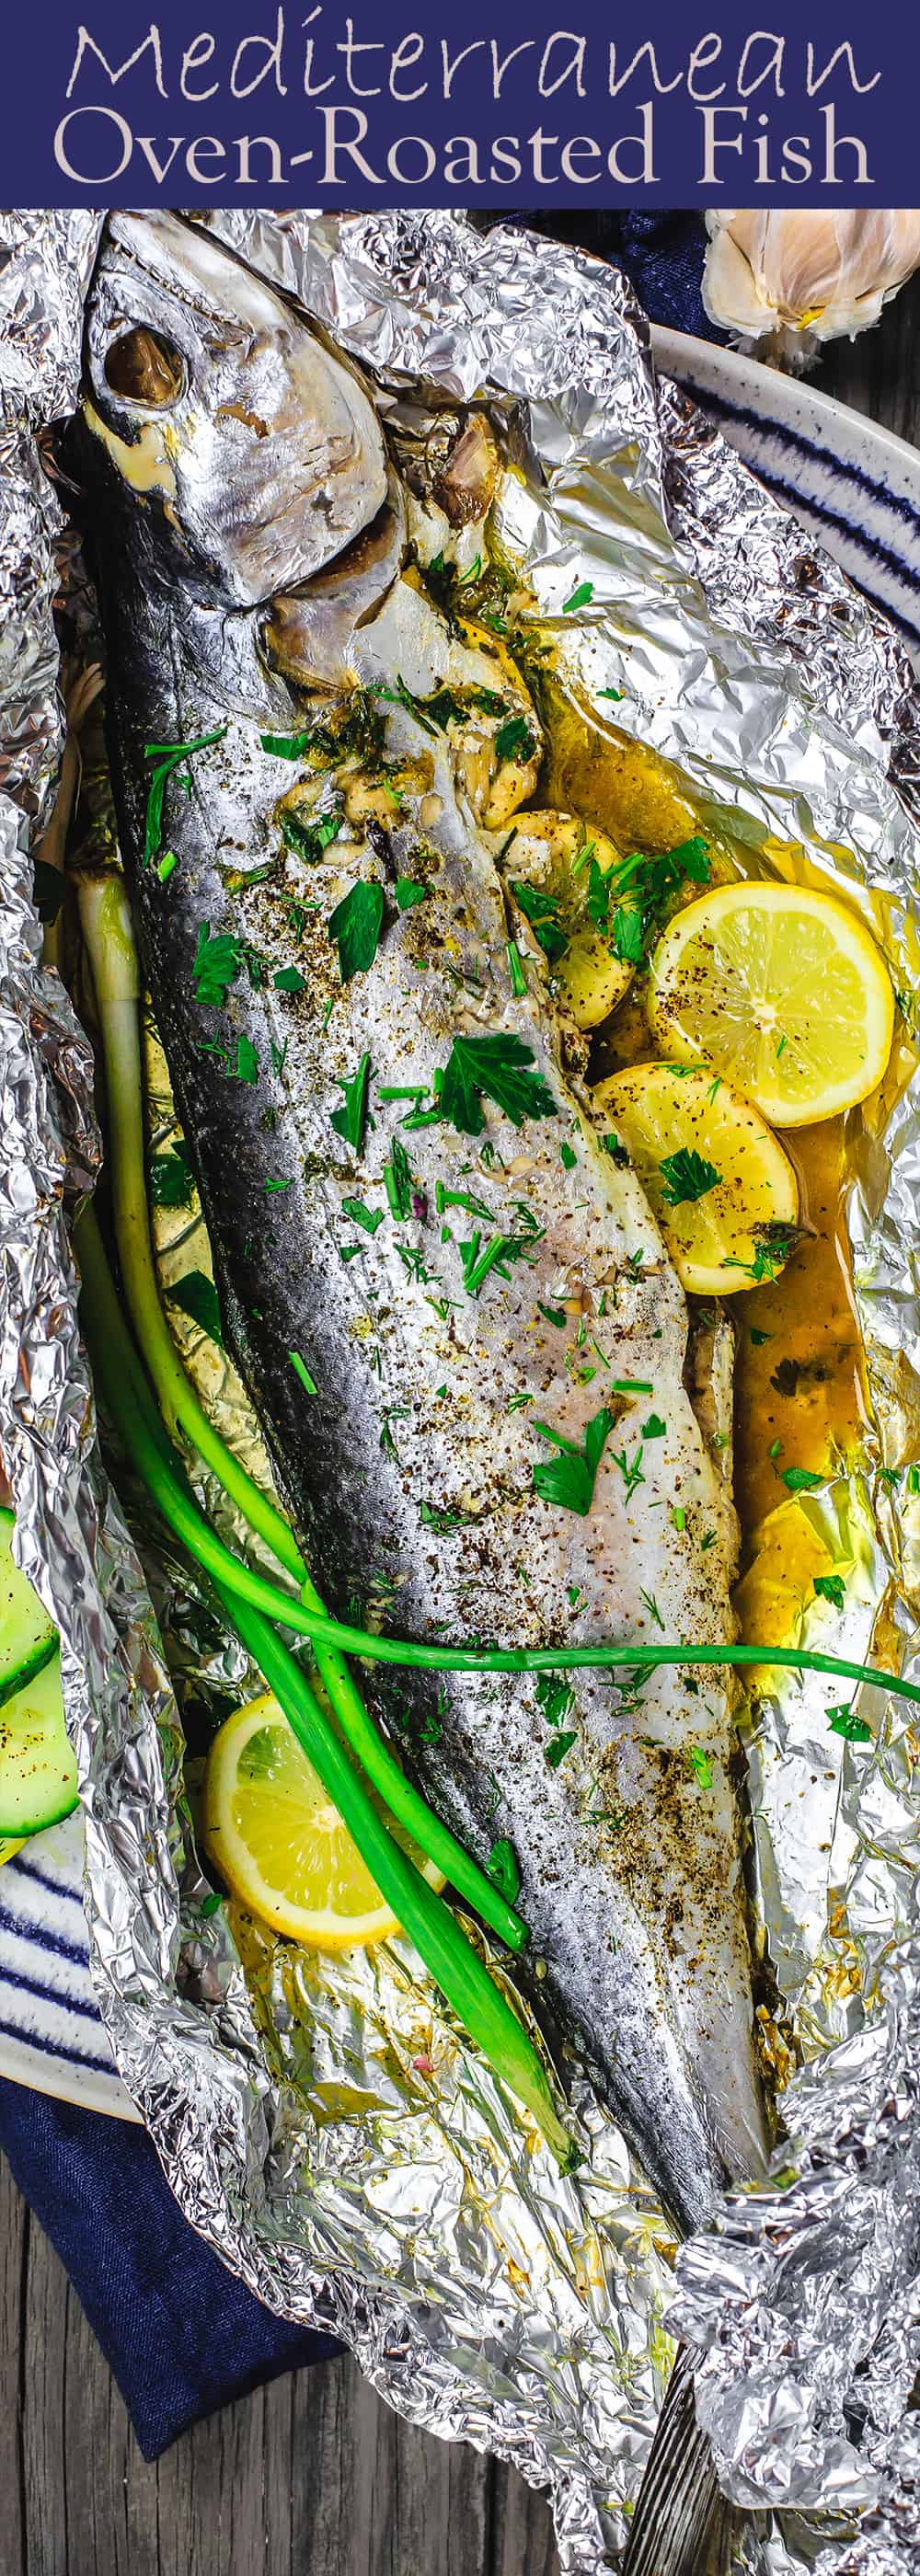 Mediterranean Oven Baked Spanish Mackerel Recipe | The Mediterranean Dish. Easy Greek inspired fish recipe. Whole fish stuffed with garlic, herbs, and lemon slices and oven baked in a foil packet with olive oil. A delicious Mediterranean diet recipe. See it on TheMediterraneanDish.com